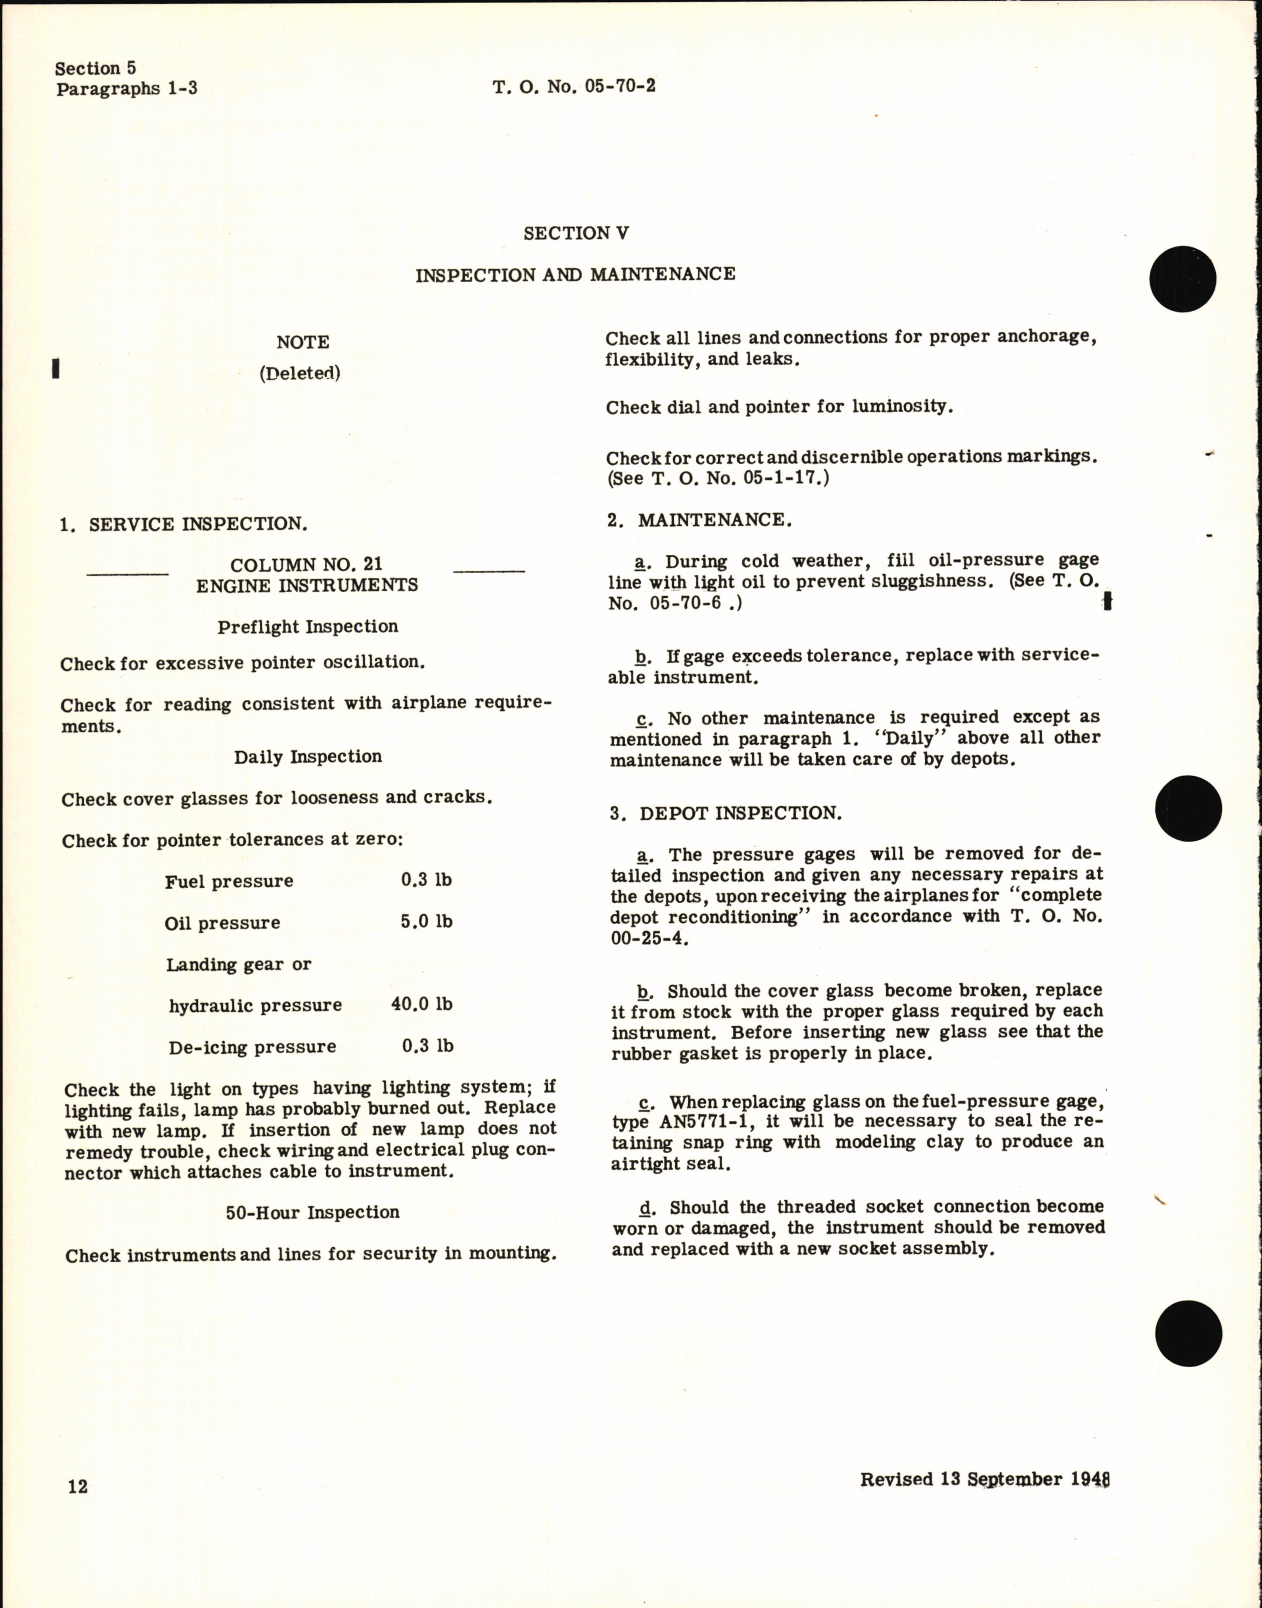 Sample page 6 from AirCorps Library document: Operation, Service, & Overhaul Instructions for Pressure Gages